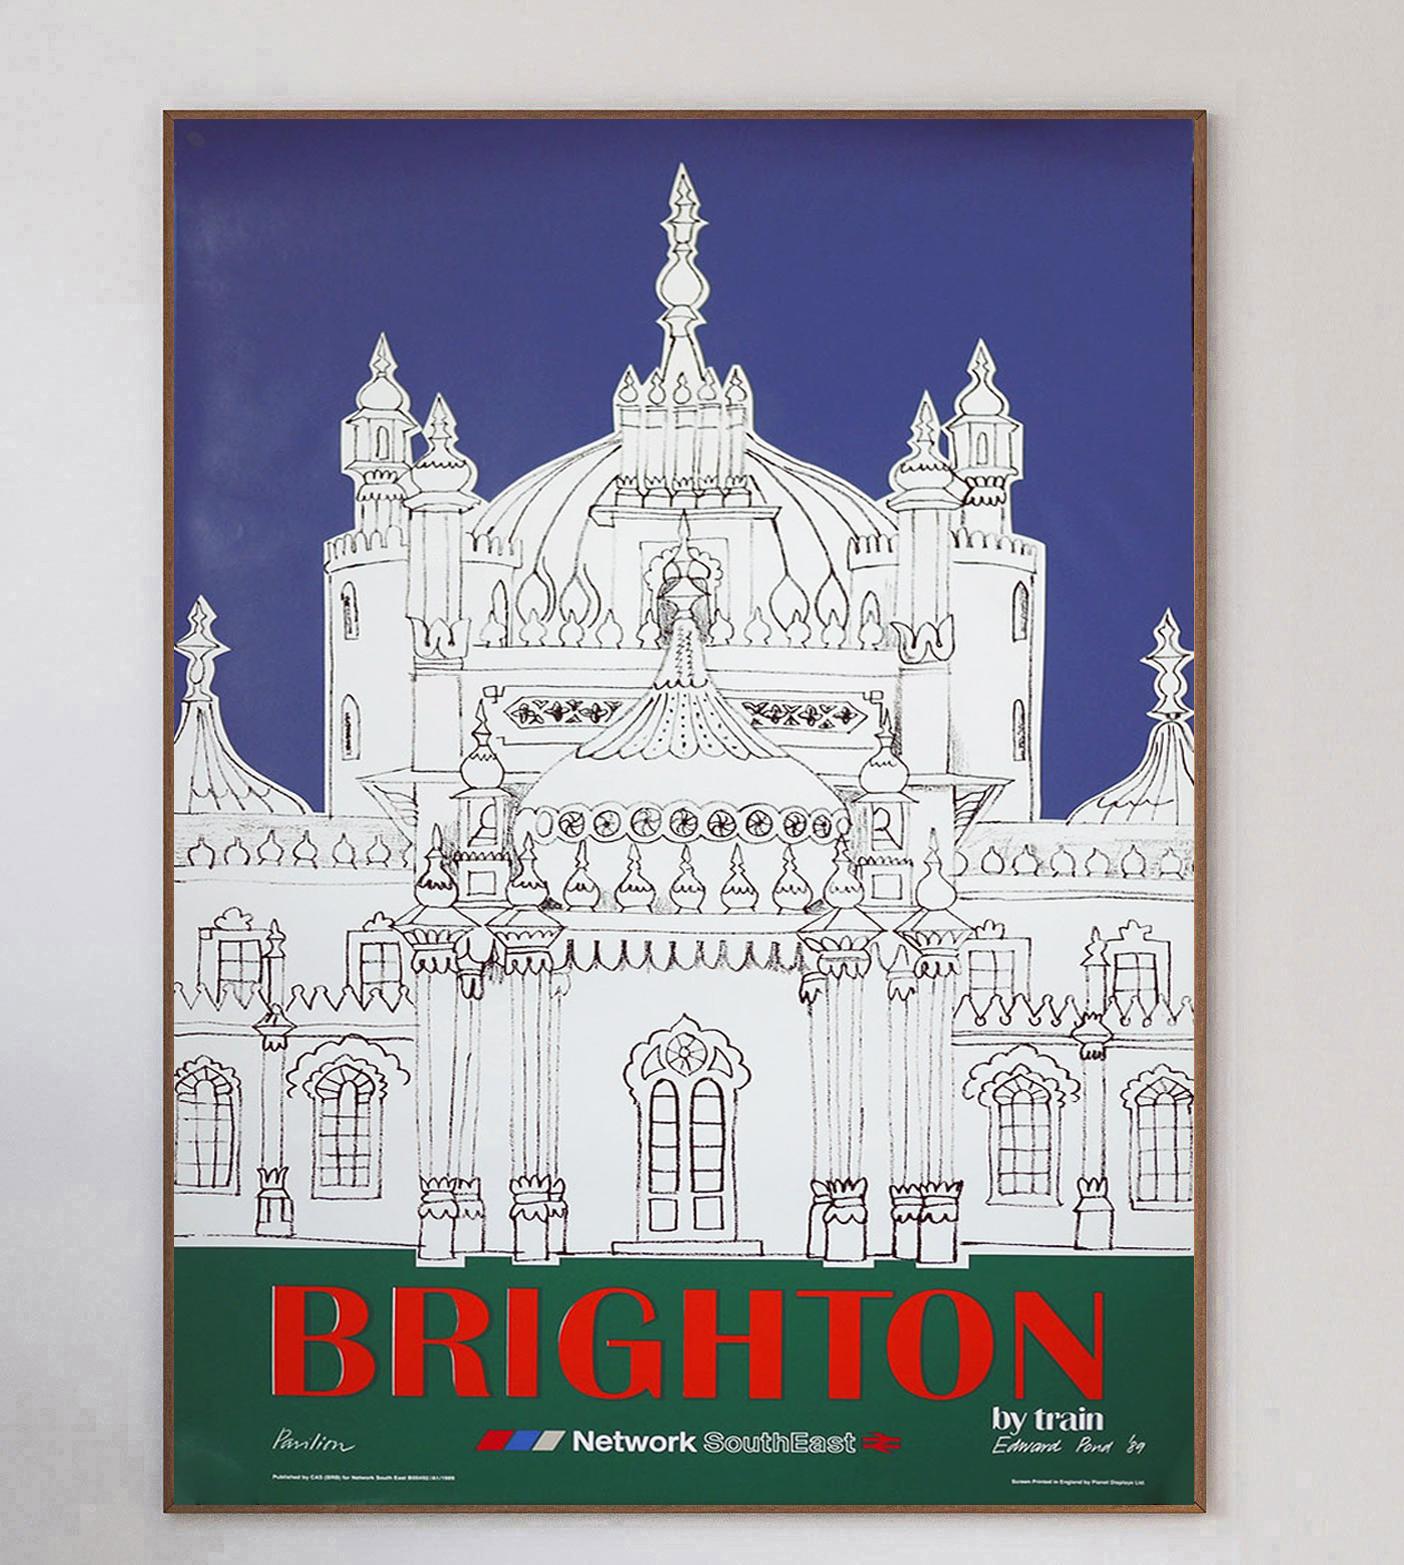 This beautiful poster was created in 1989 to promote British Railways new Network SouthEast region, and routes to the seaside city of Brighton. The vibrant design depicts the famous Royal Pavilion and was designed by Edward Pond who was commissioned